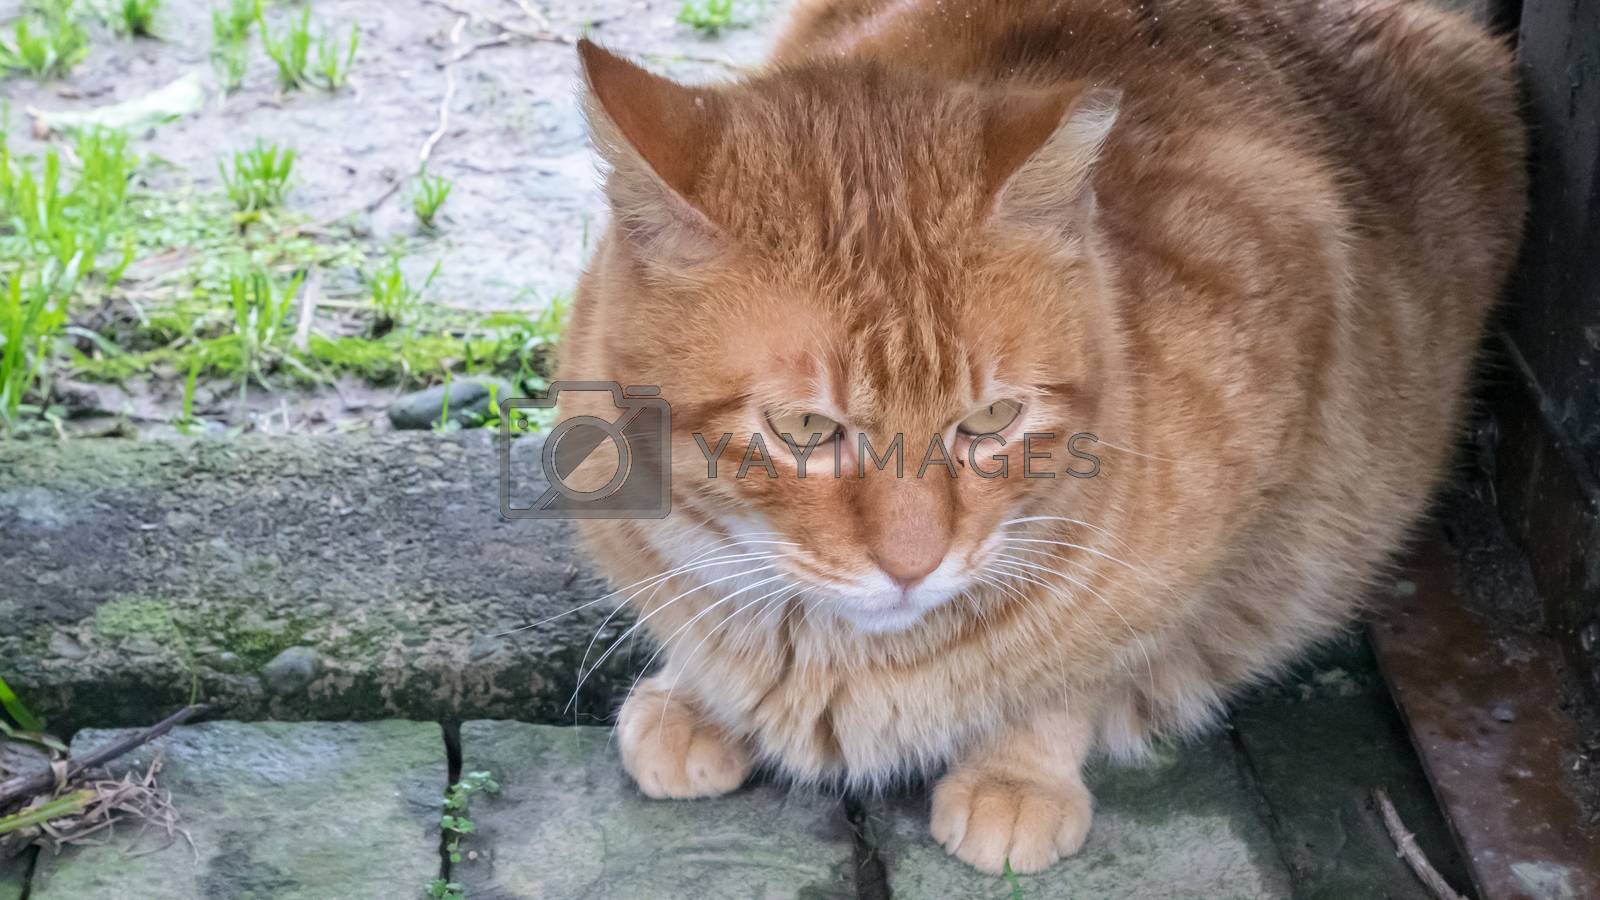 Royalty free image of The cute tabby cat sitting in garden. by phasuthorn